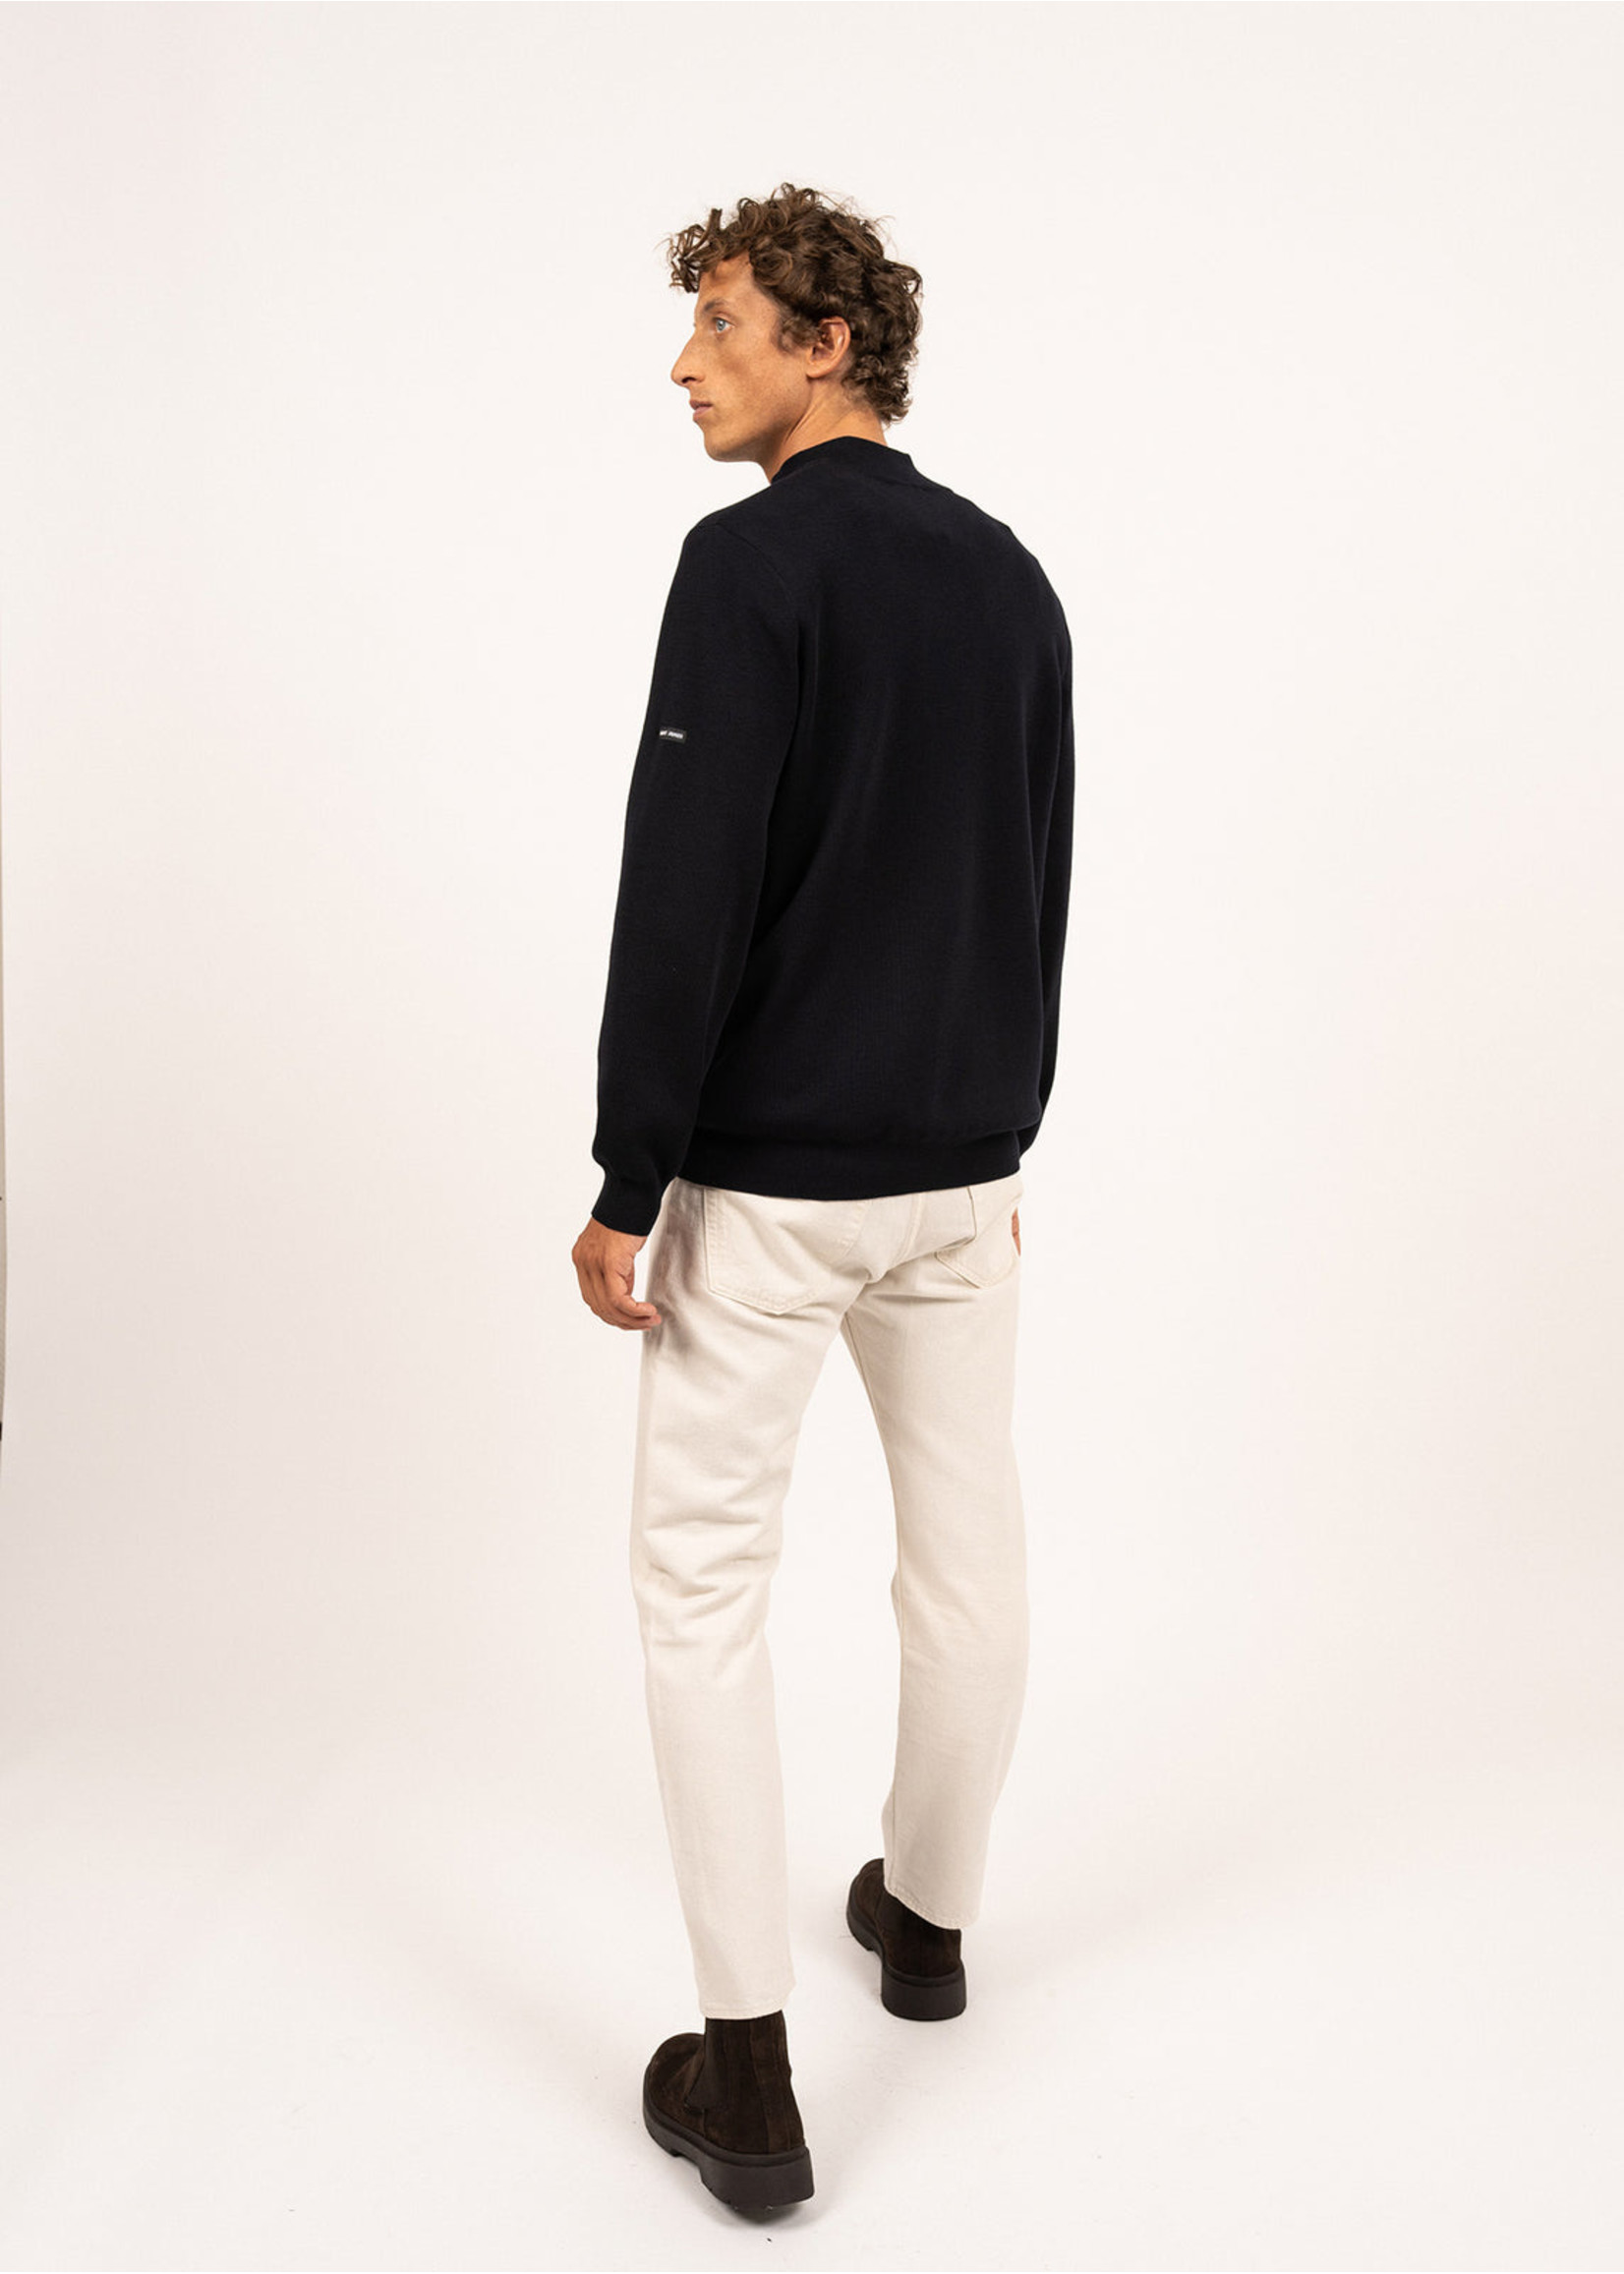 SAINT-JAMES Crossley jumper with zipped high-neck, in soft wool